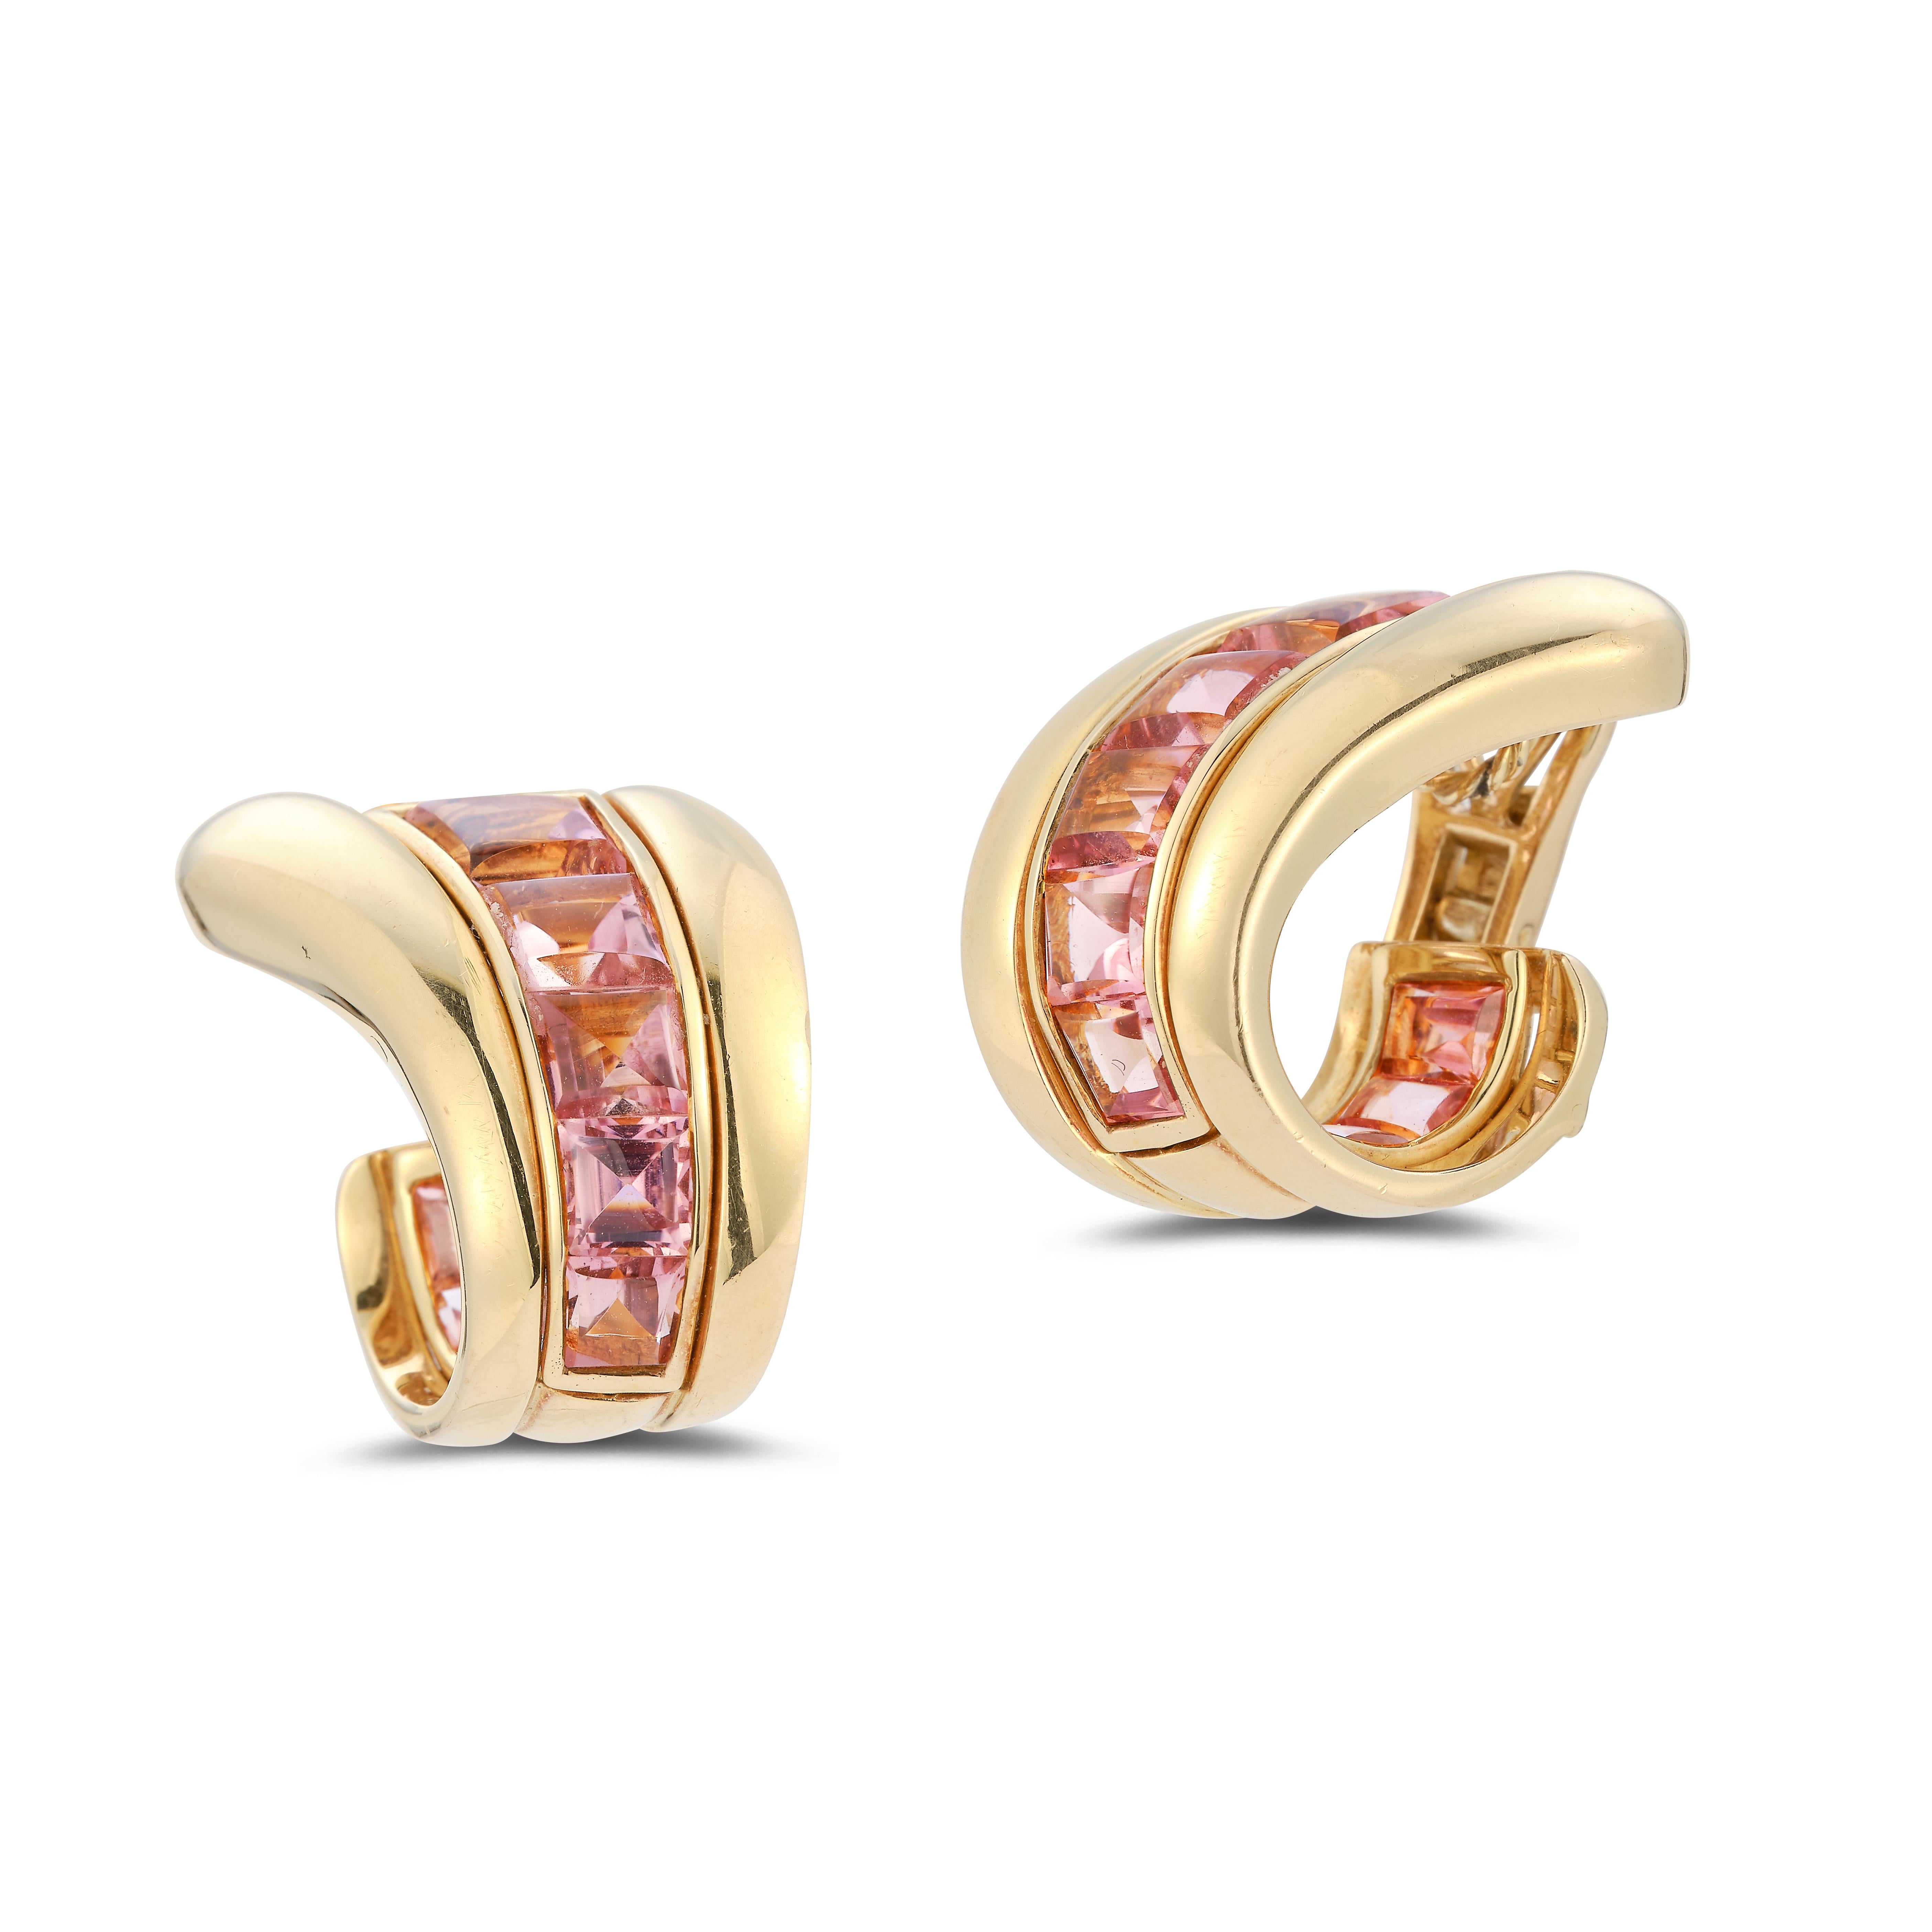 Verdura Tourmaline & Gold Earrings In Excellent Condition For Sale In New York, NY